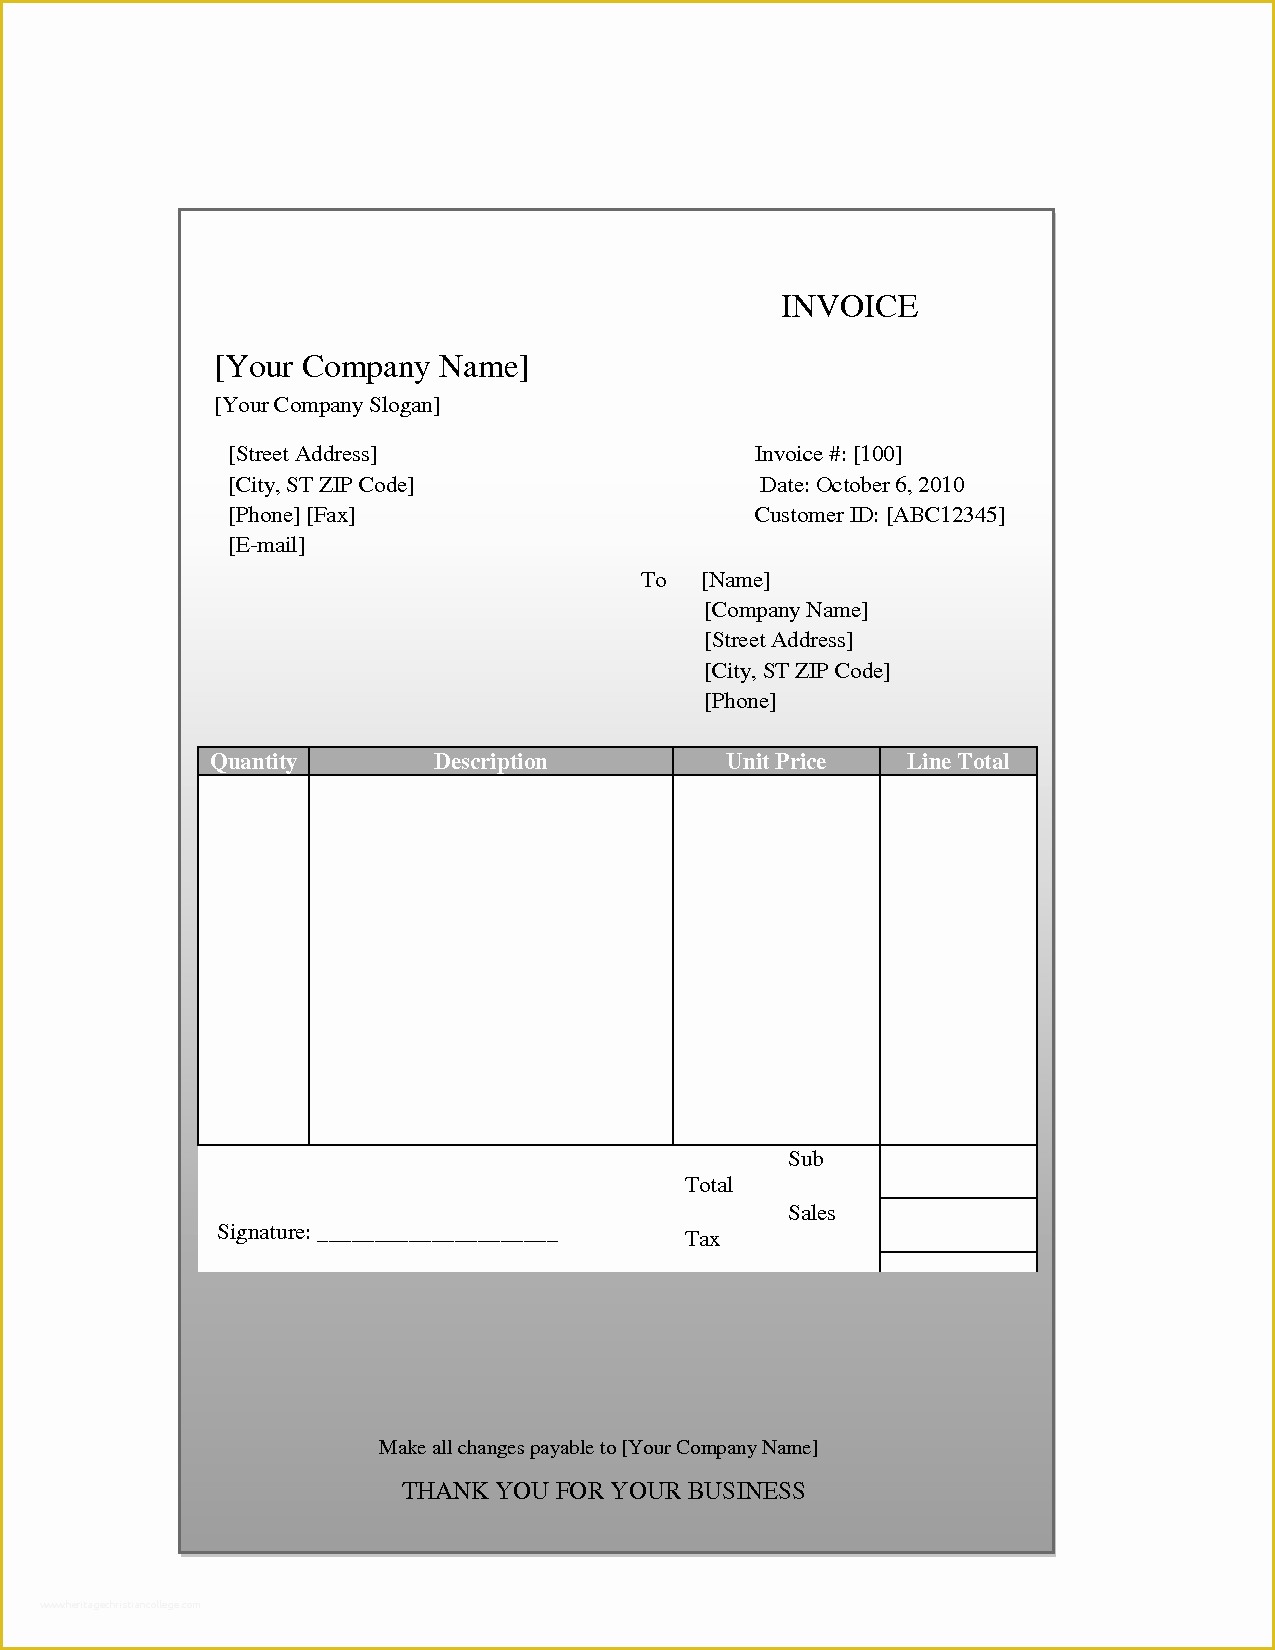 Basic Invoice Template Free Of Word Invoice Template Mac